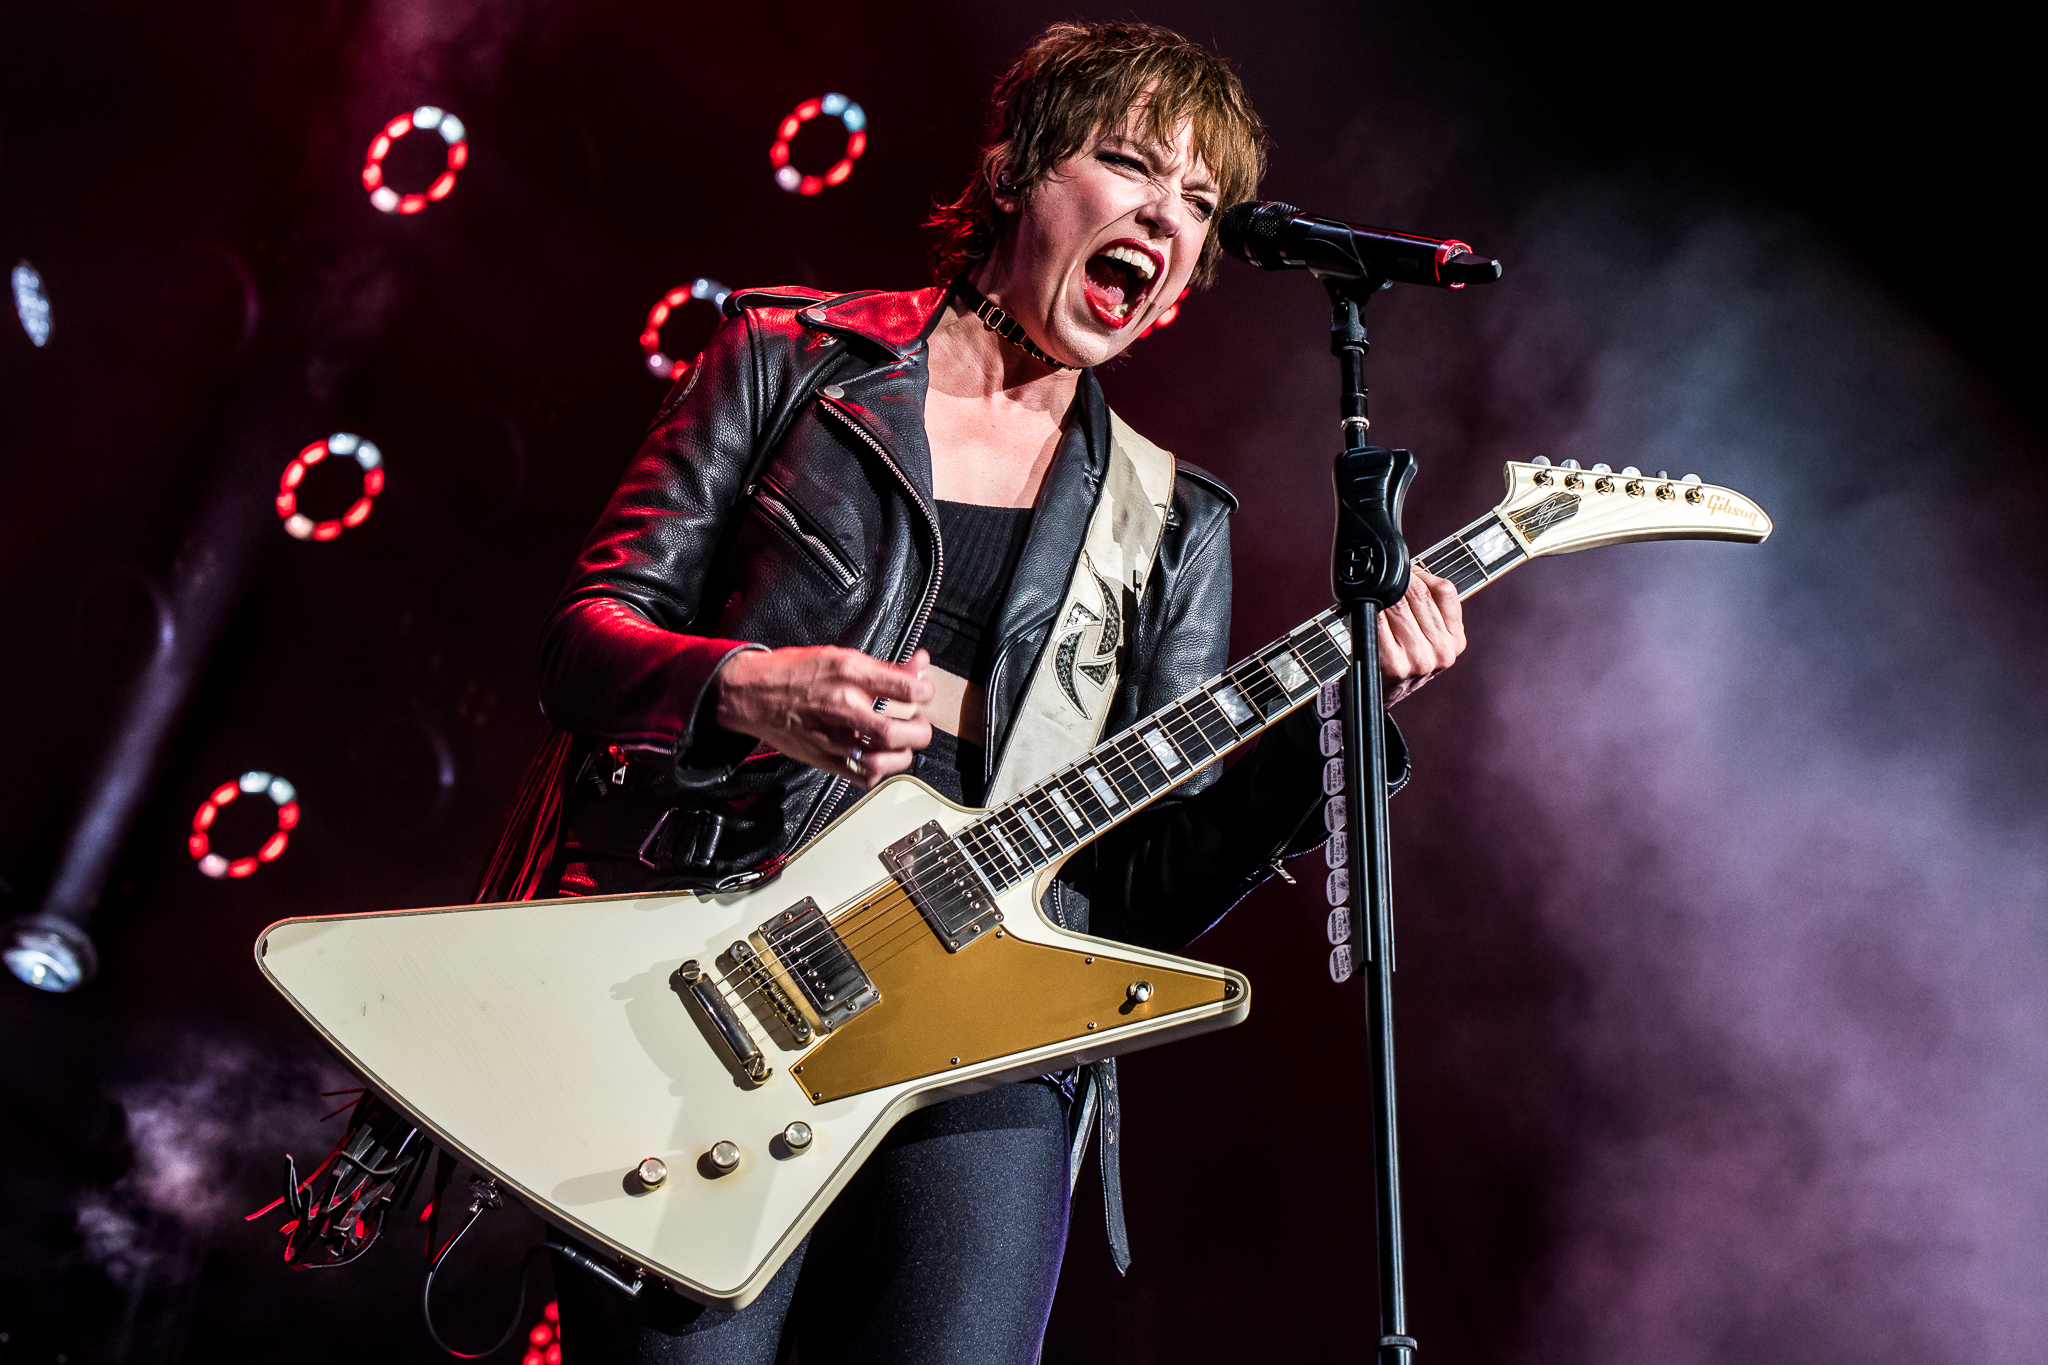 Halestorm, The Pretty Reckless Announce U.S. Tour with The Warning, Lilith Czar